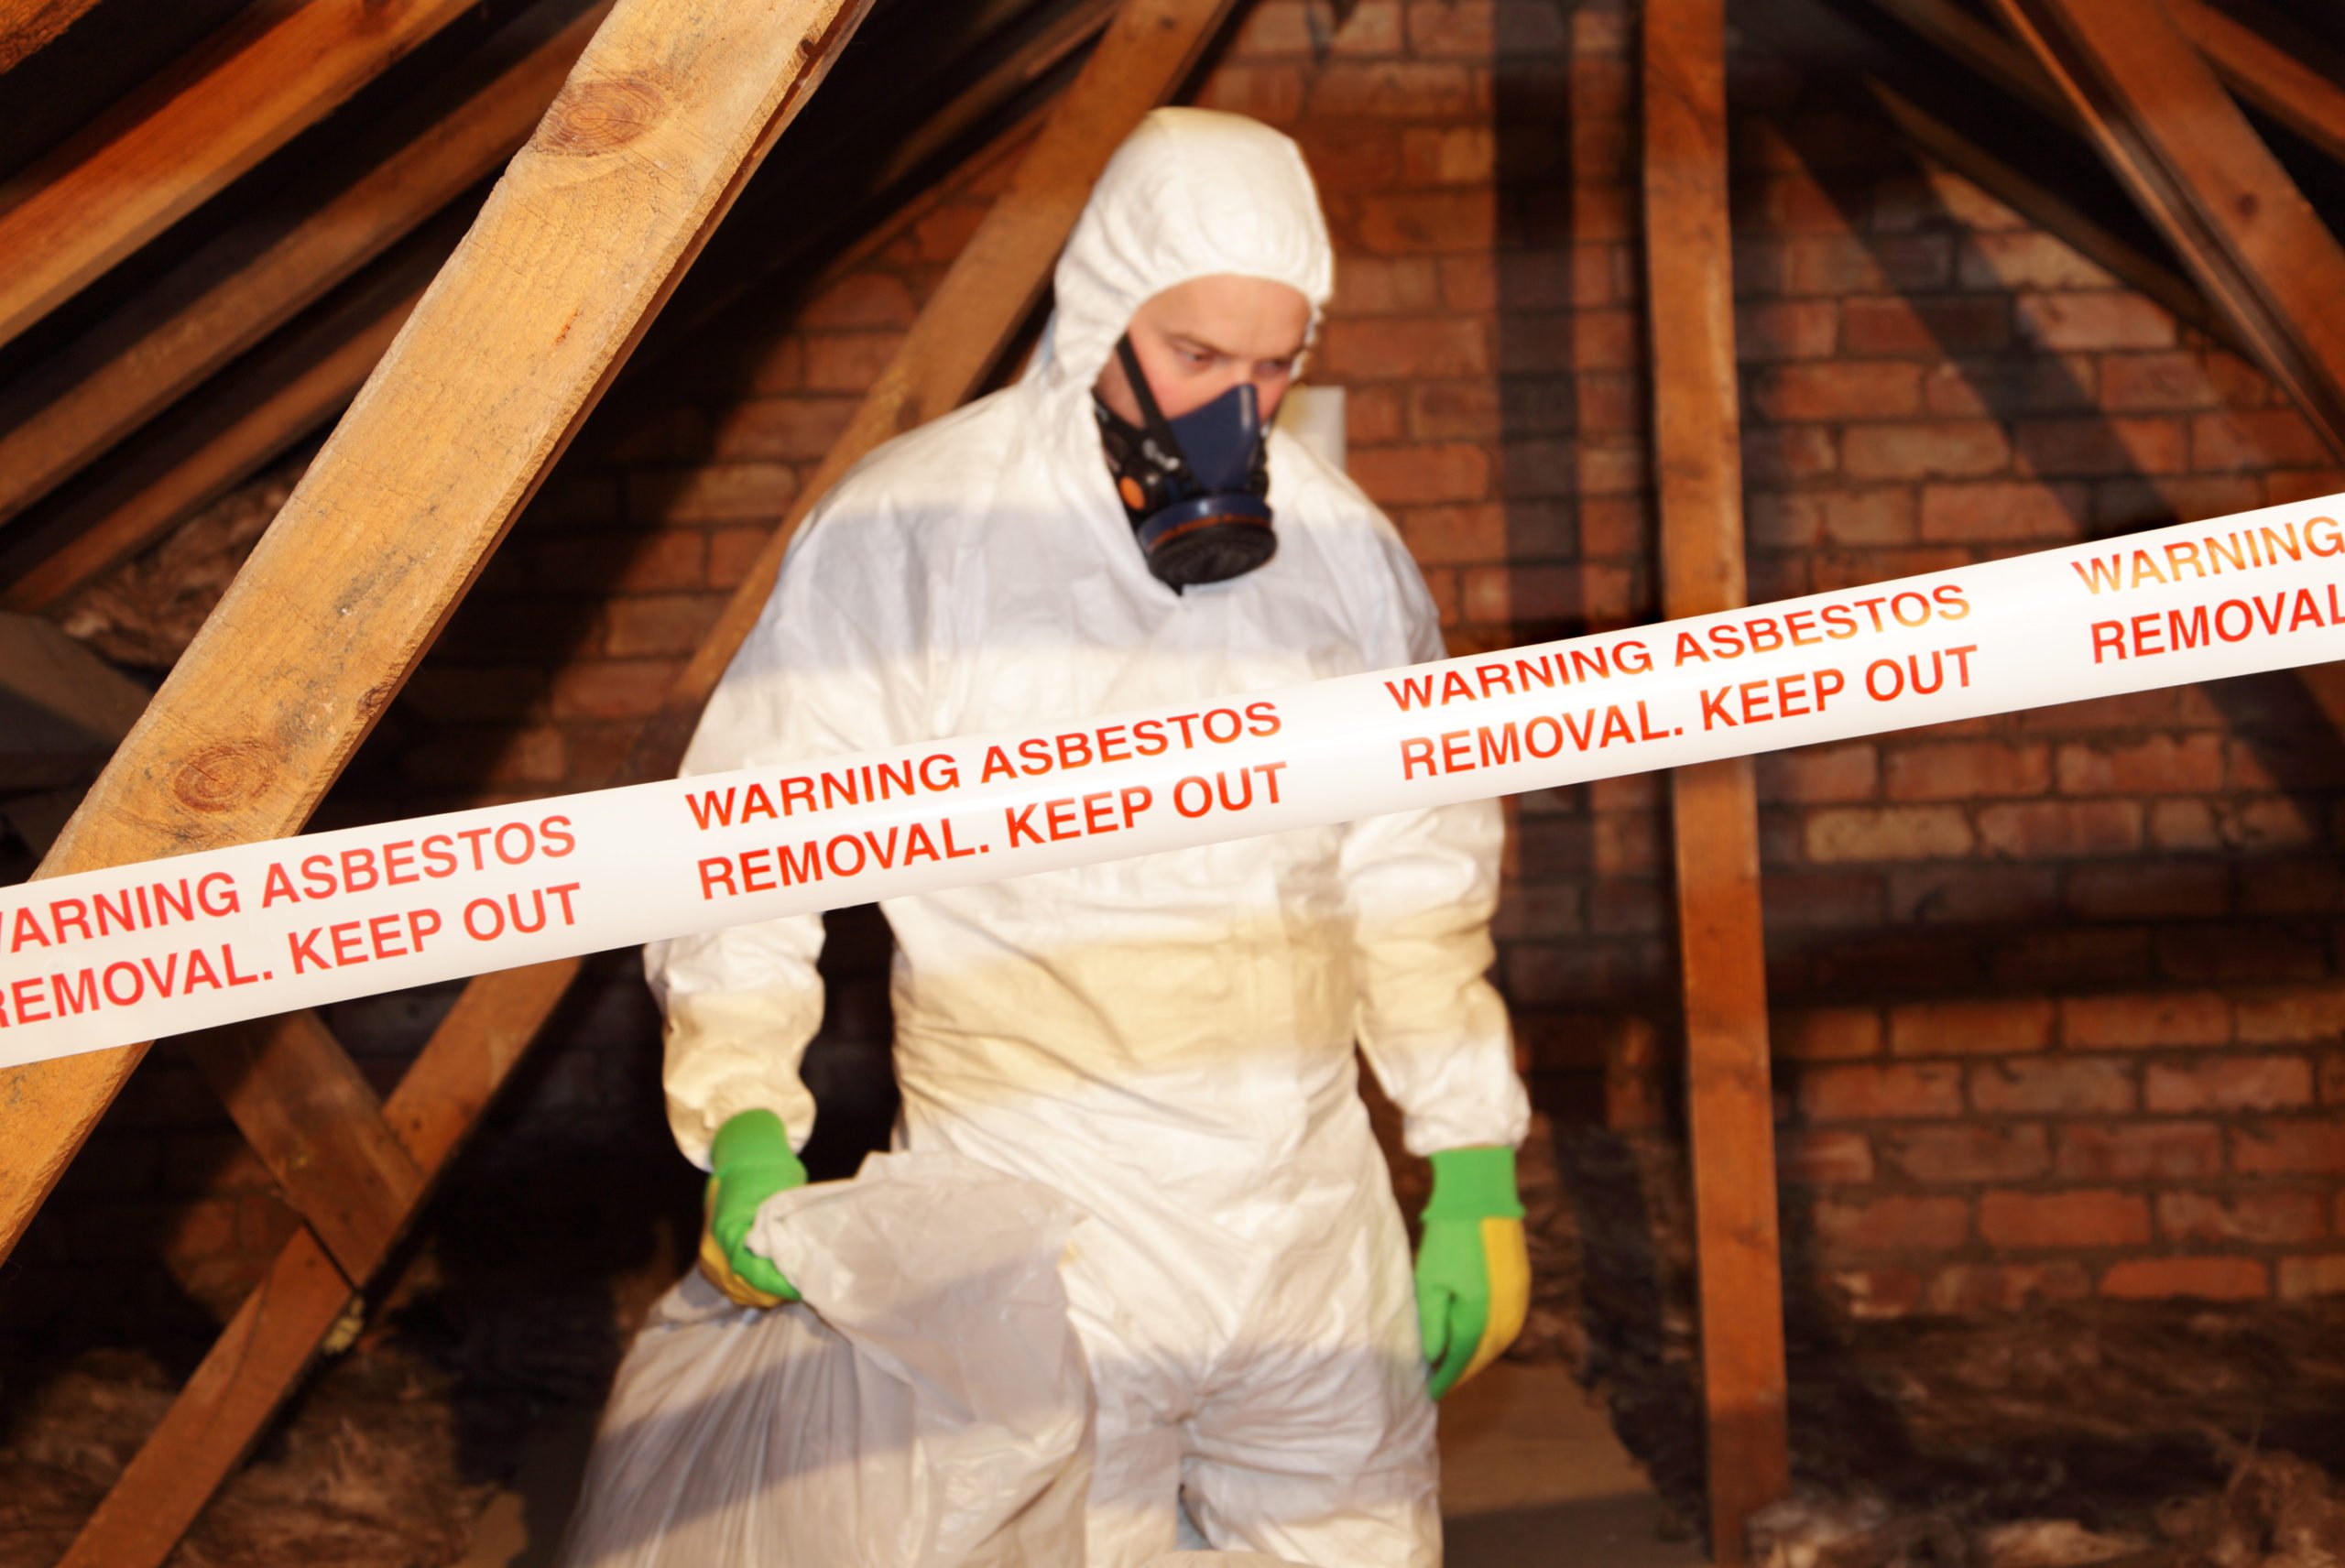 Asbestos surveys and removals by RJS Waste Management